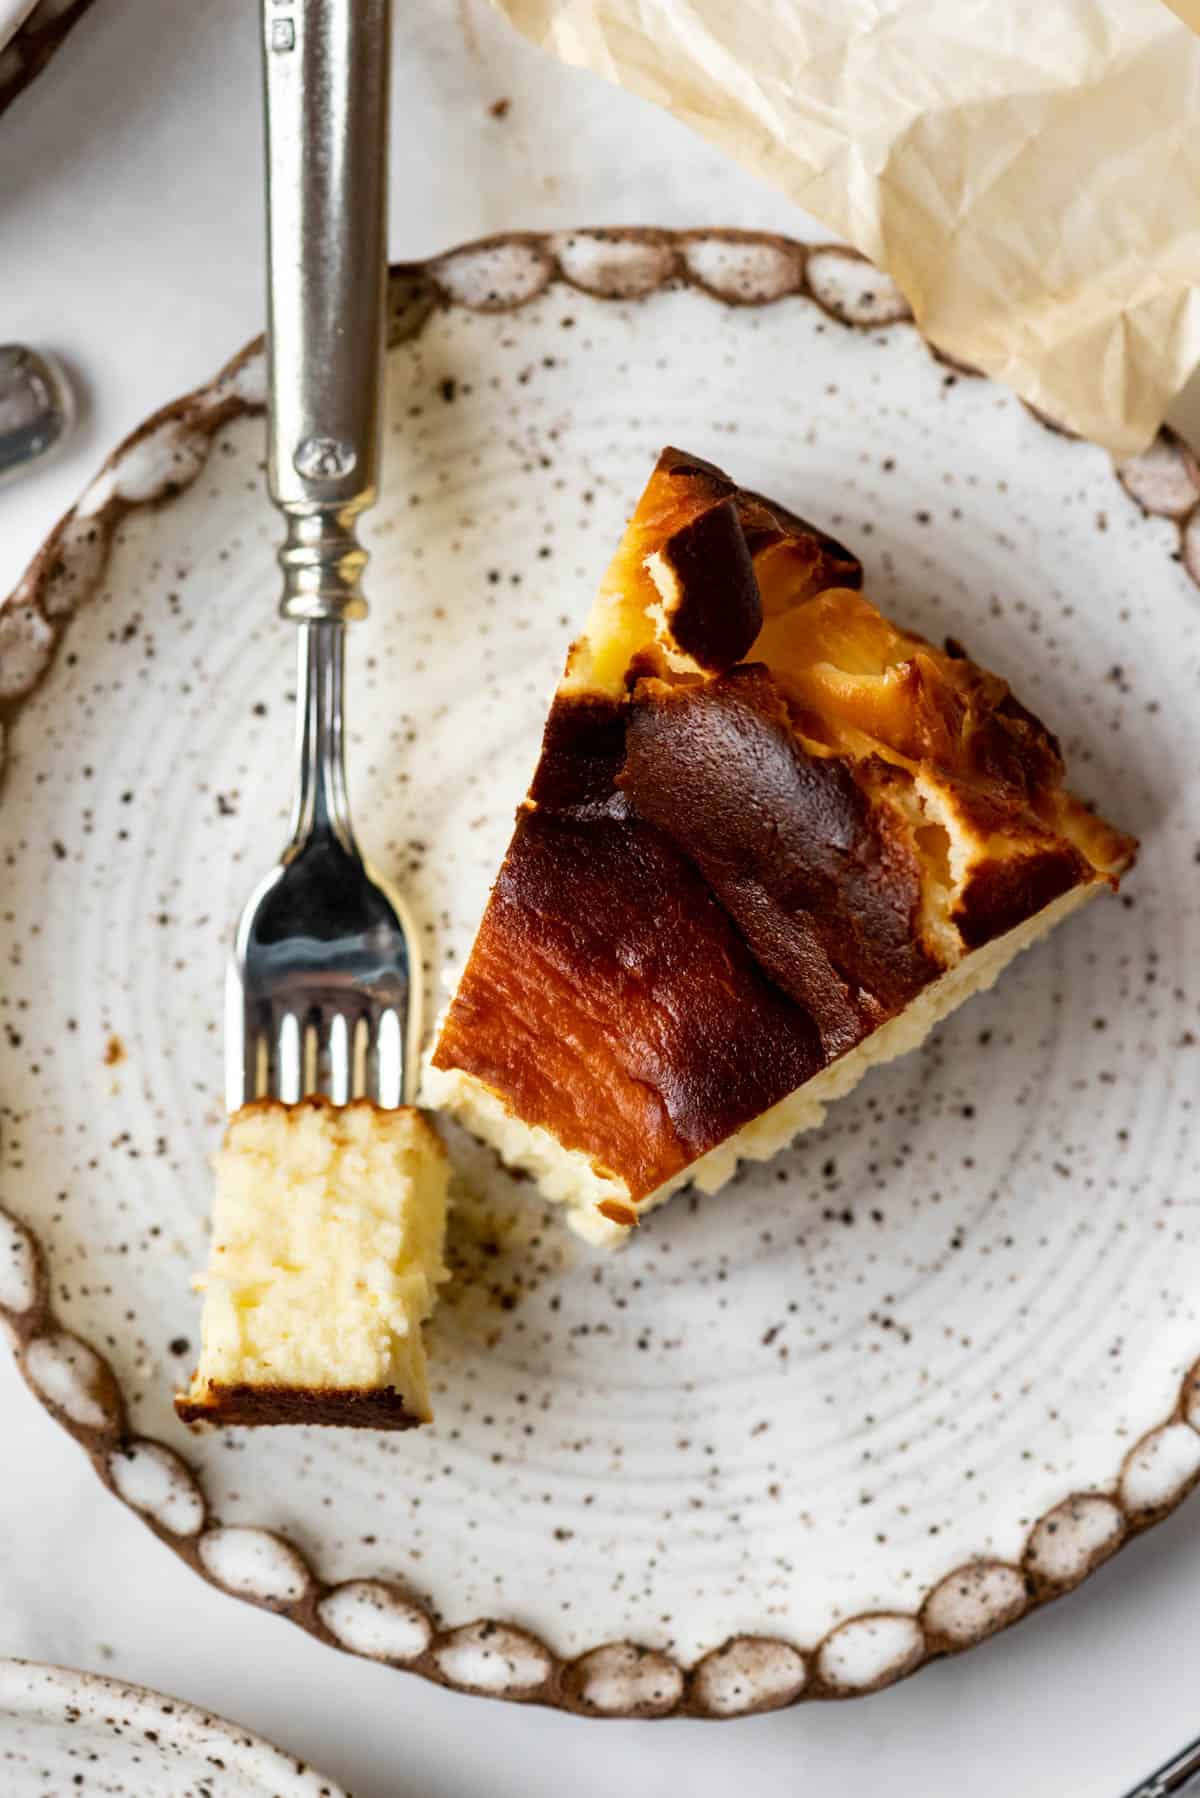 A bite of Basque cheesecake on a fork next to the slice of cheesecake on a plate.